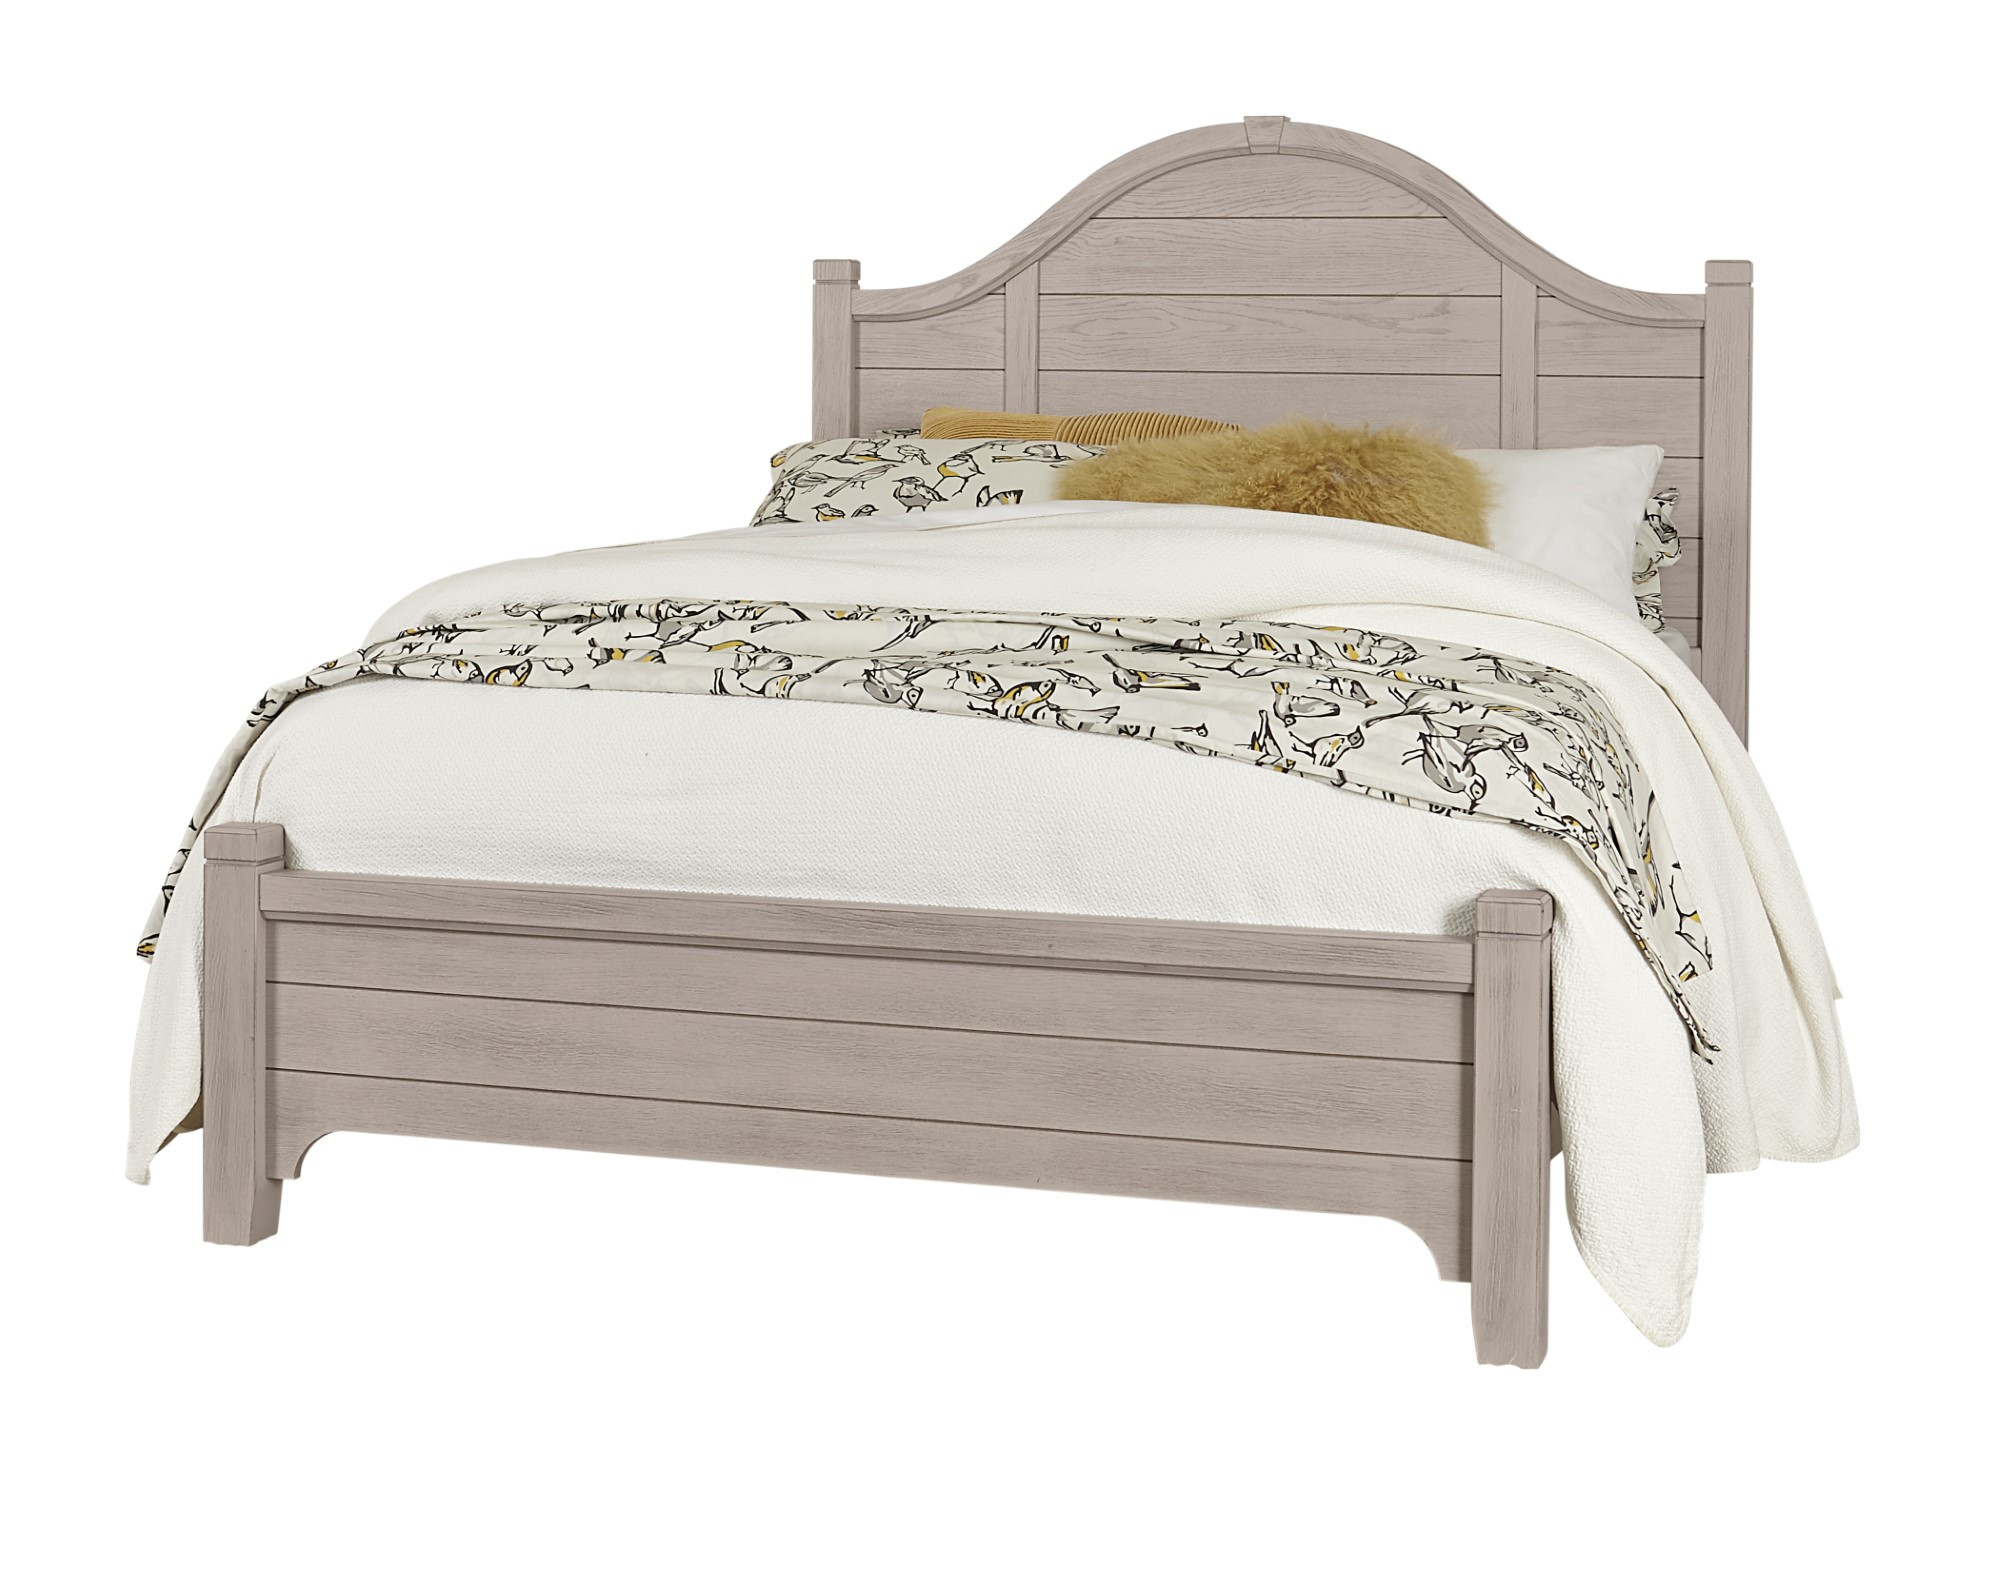 King Arch Bed W/ Low Profile Footboard